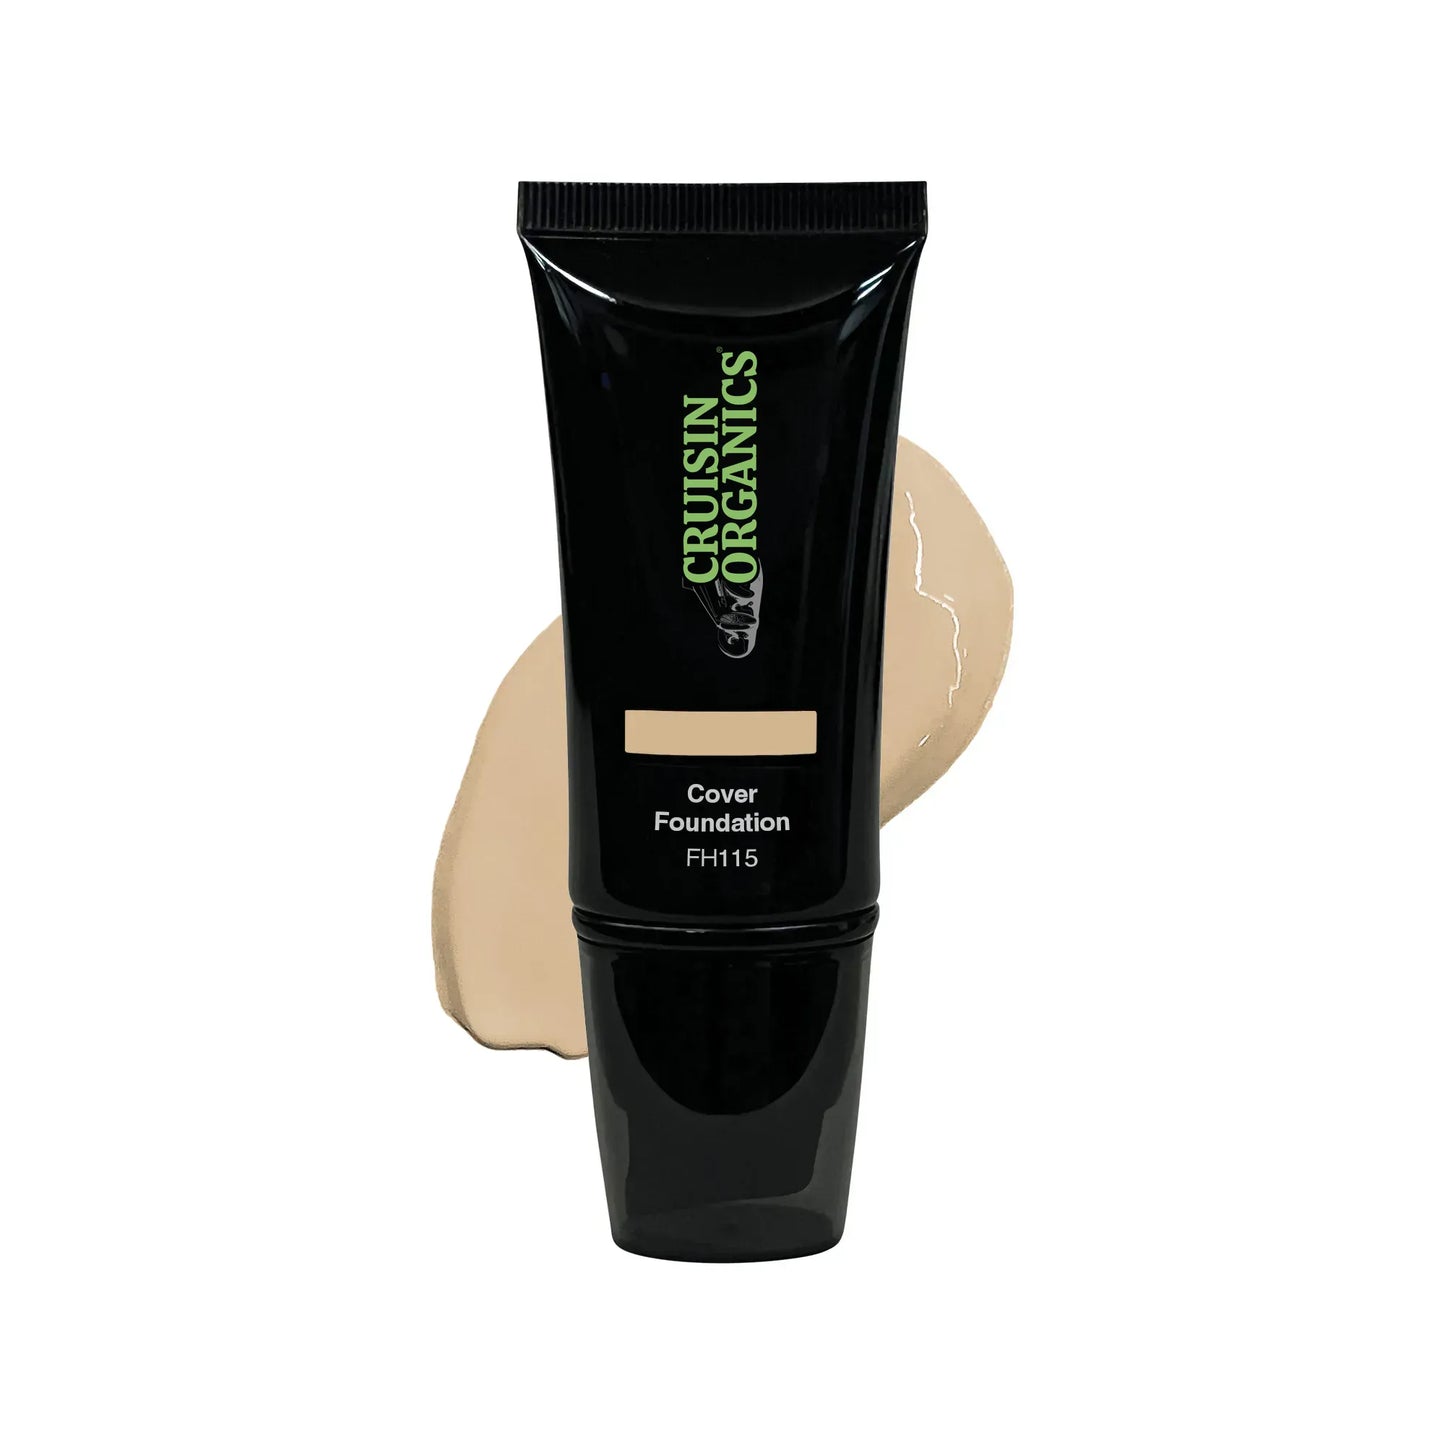 Use Cruisin Organics Desert No Sweat Foundation to stay dry and beat the heat. Hotshot for exploring the Desert Botanical Gardens in Phoenix, Arizona or taking a trip to Camelback East, our foundation contains FDA approved Propylene Glycol which won't irritate your skin.